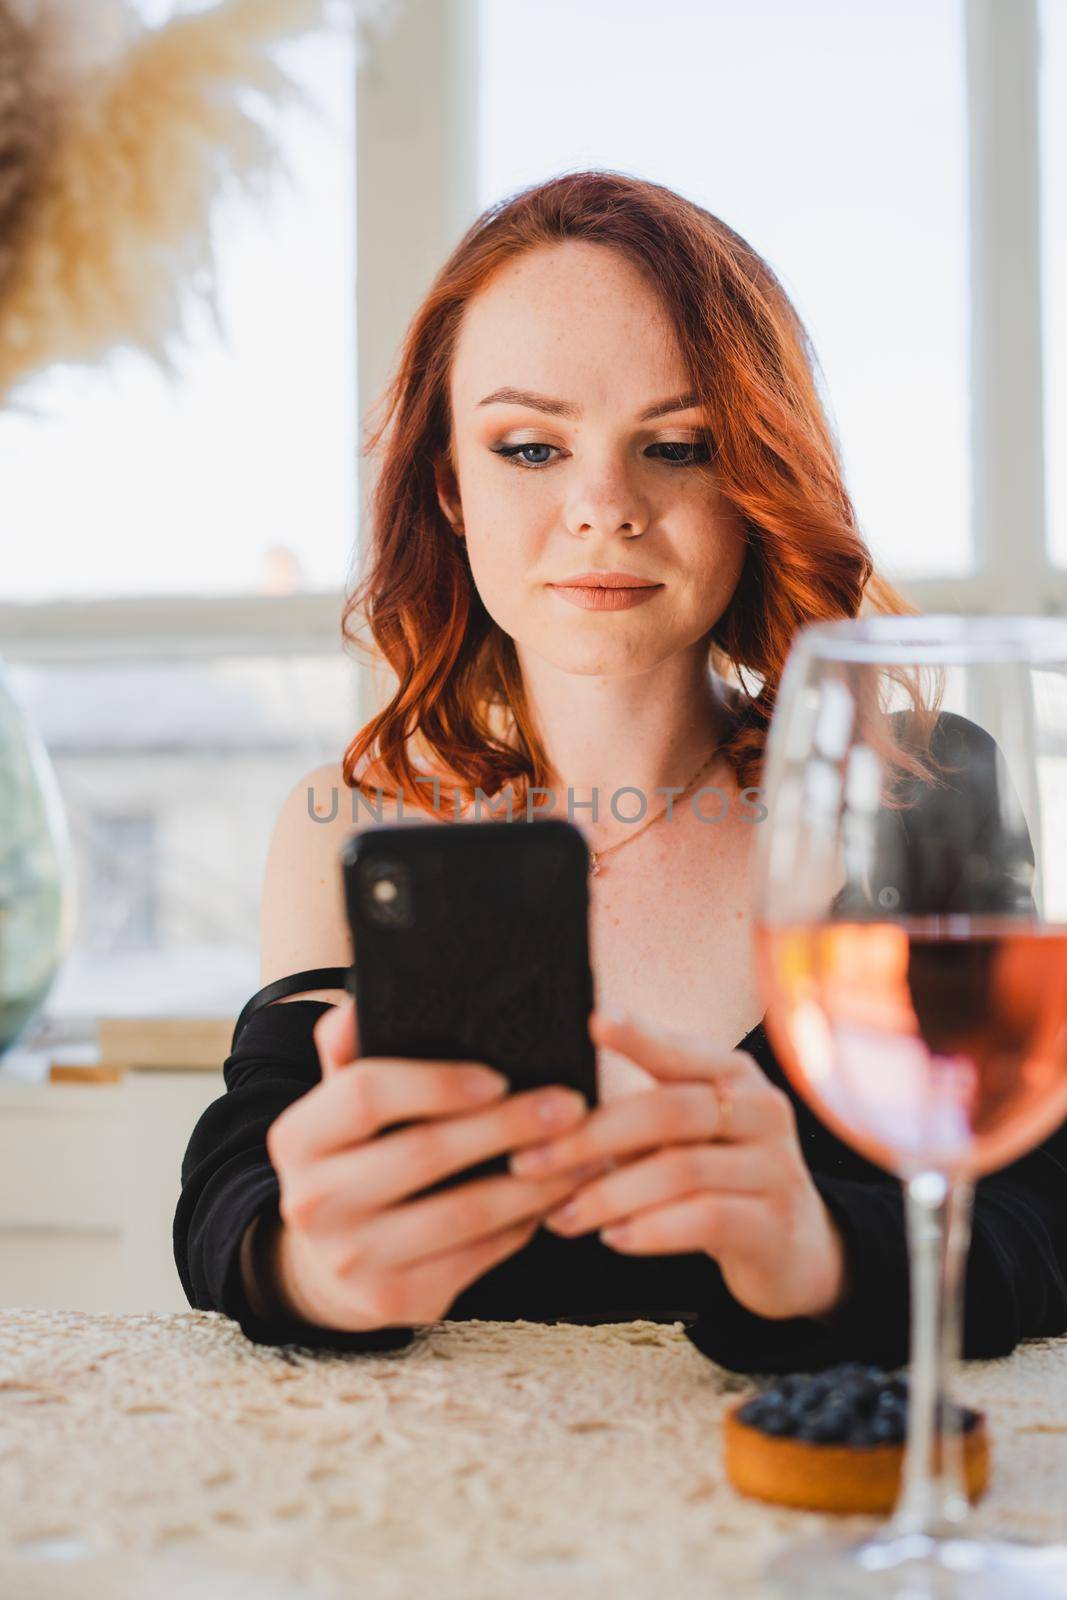 Beautiful girl with red hair holding a smartphone. There's a glass of rose wine on the table. The girl is resting.